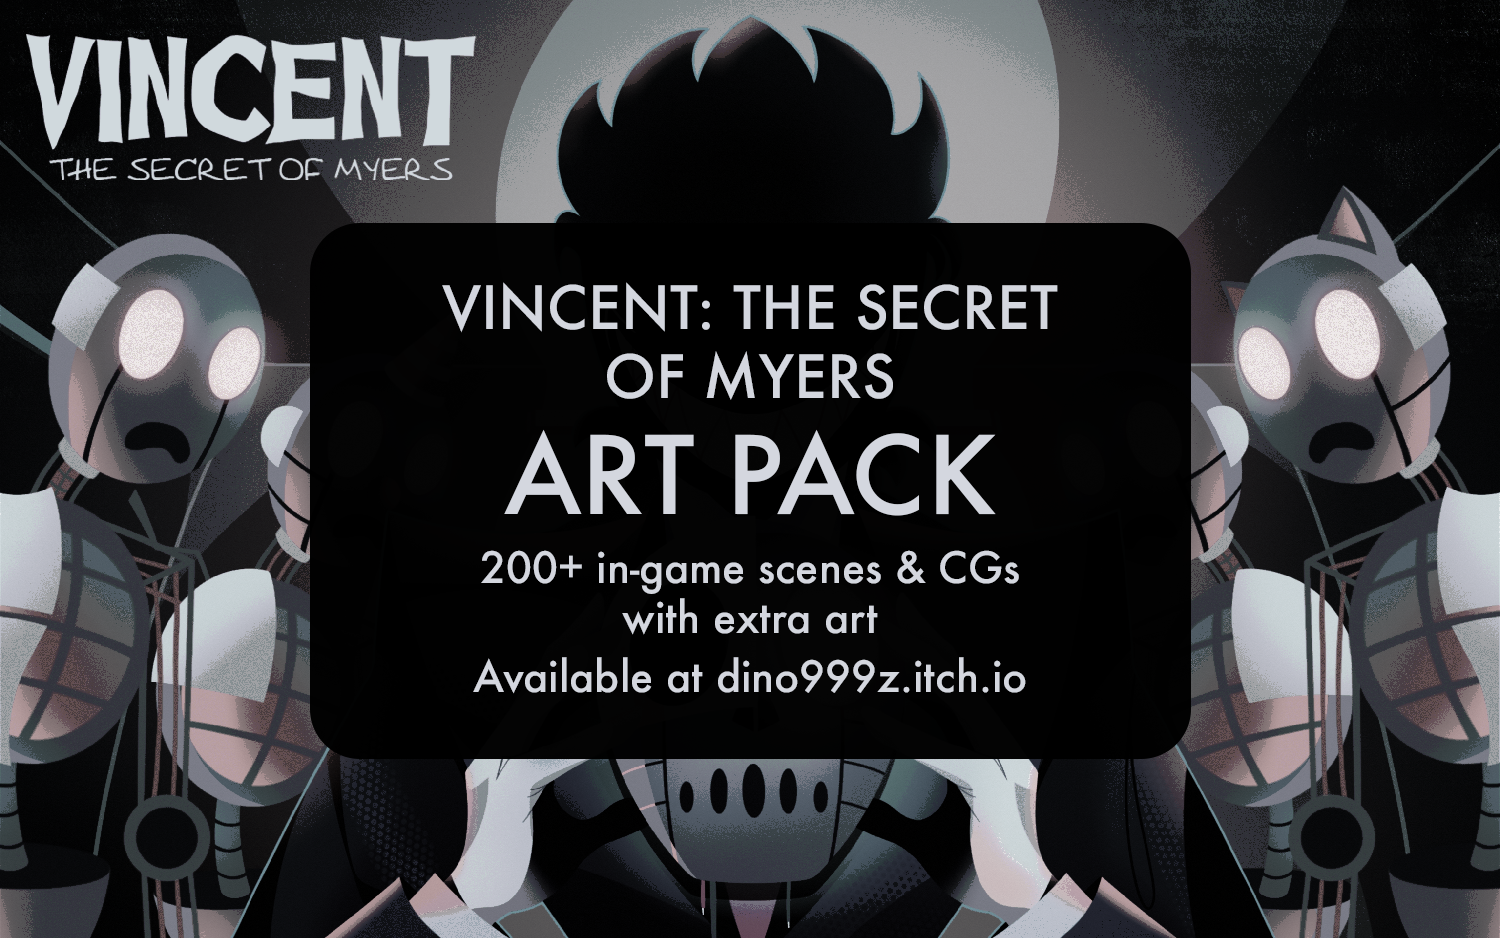 Vincent: The Secret of Myers - Art Pack by dino999z